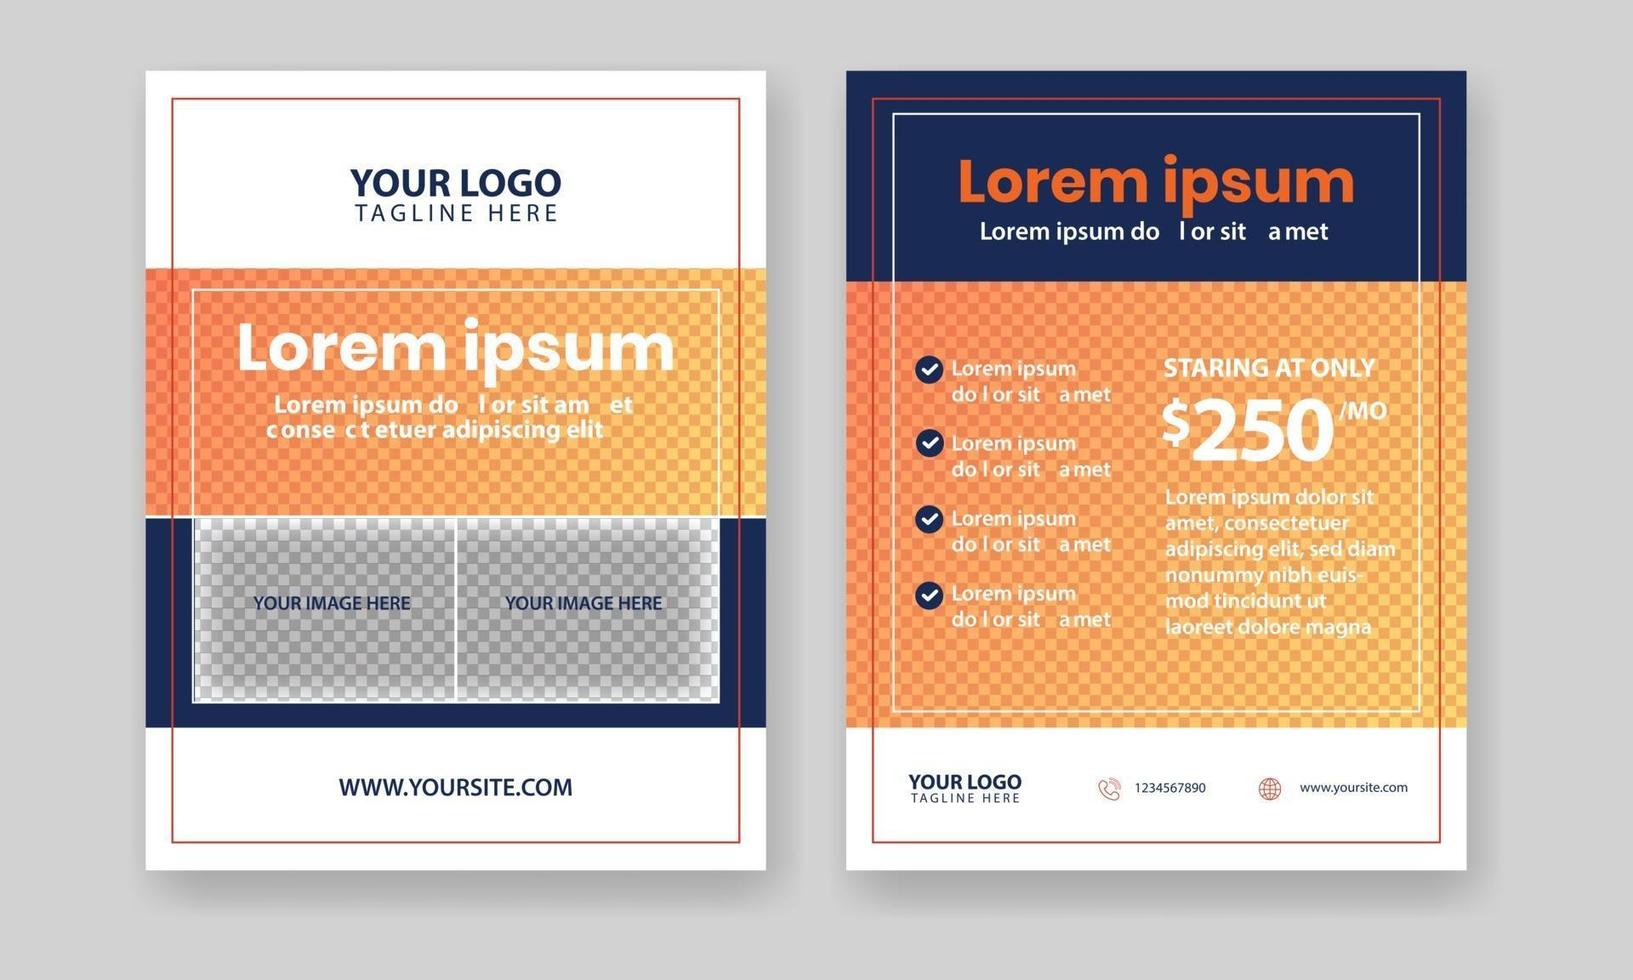 Professional Clean and Elegant Flyer Corporate Promotion Design vector